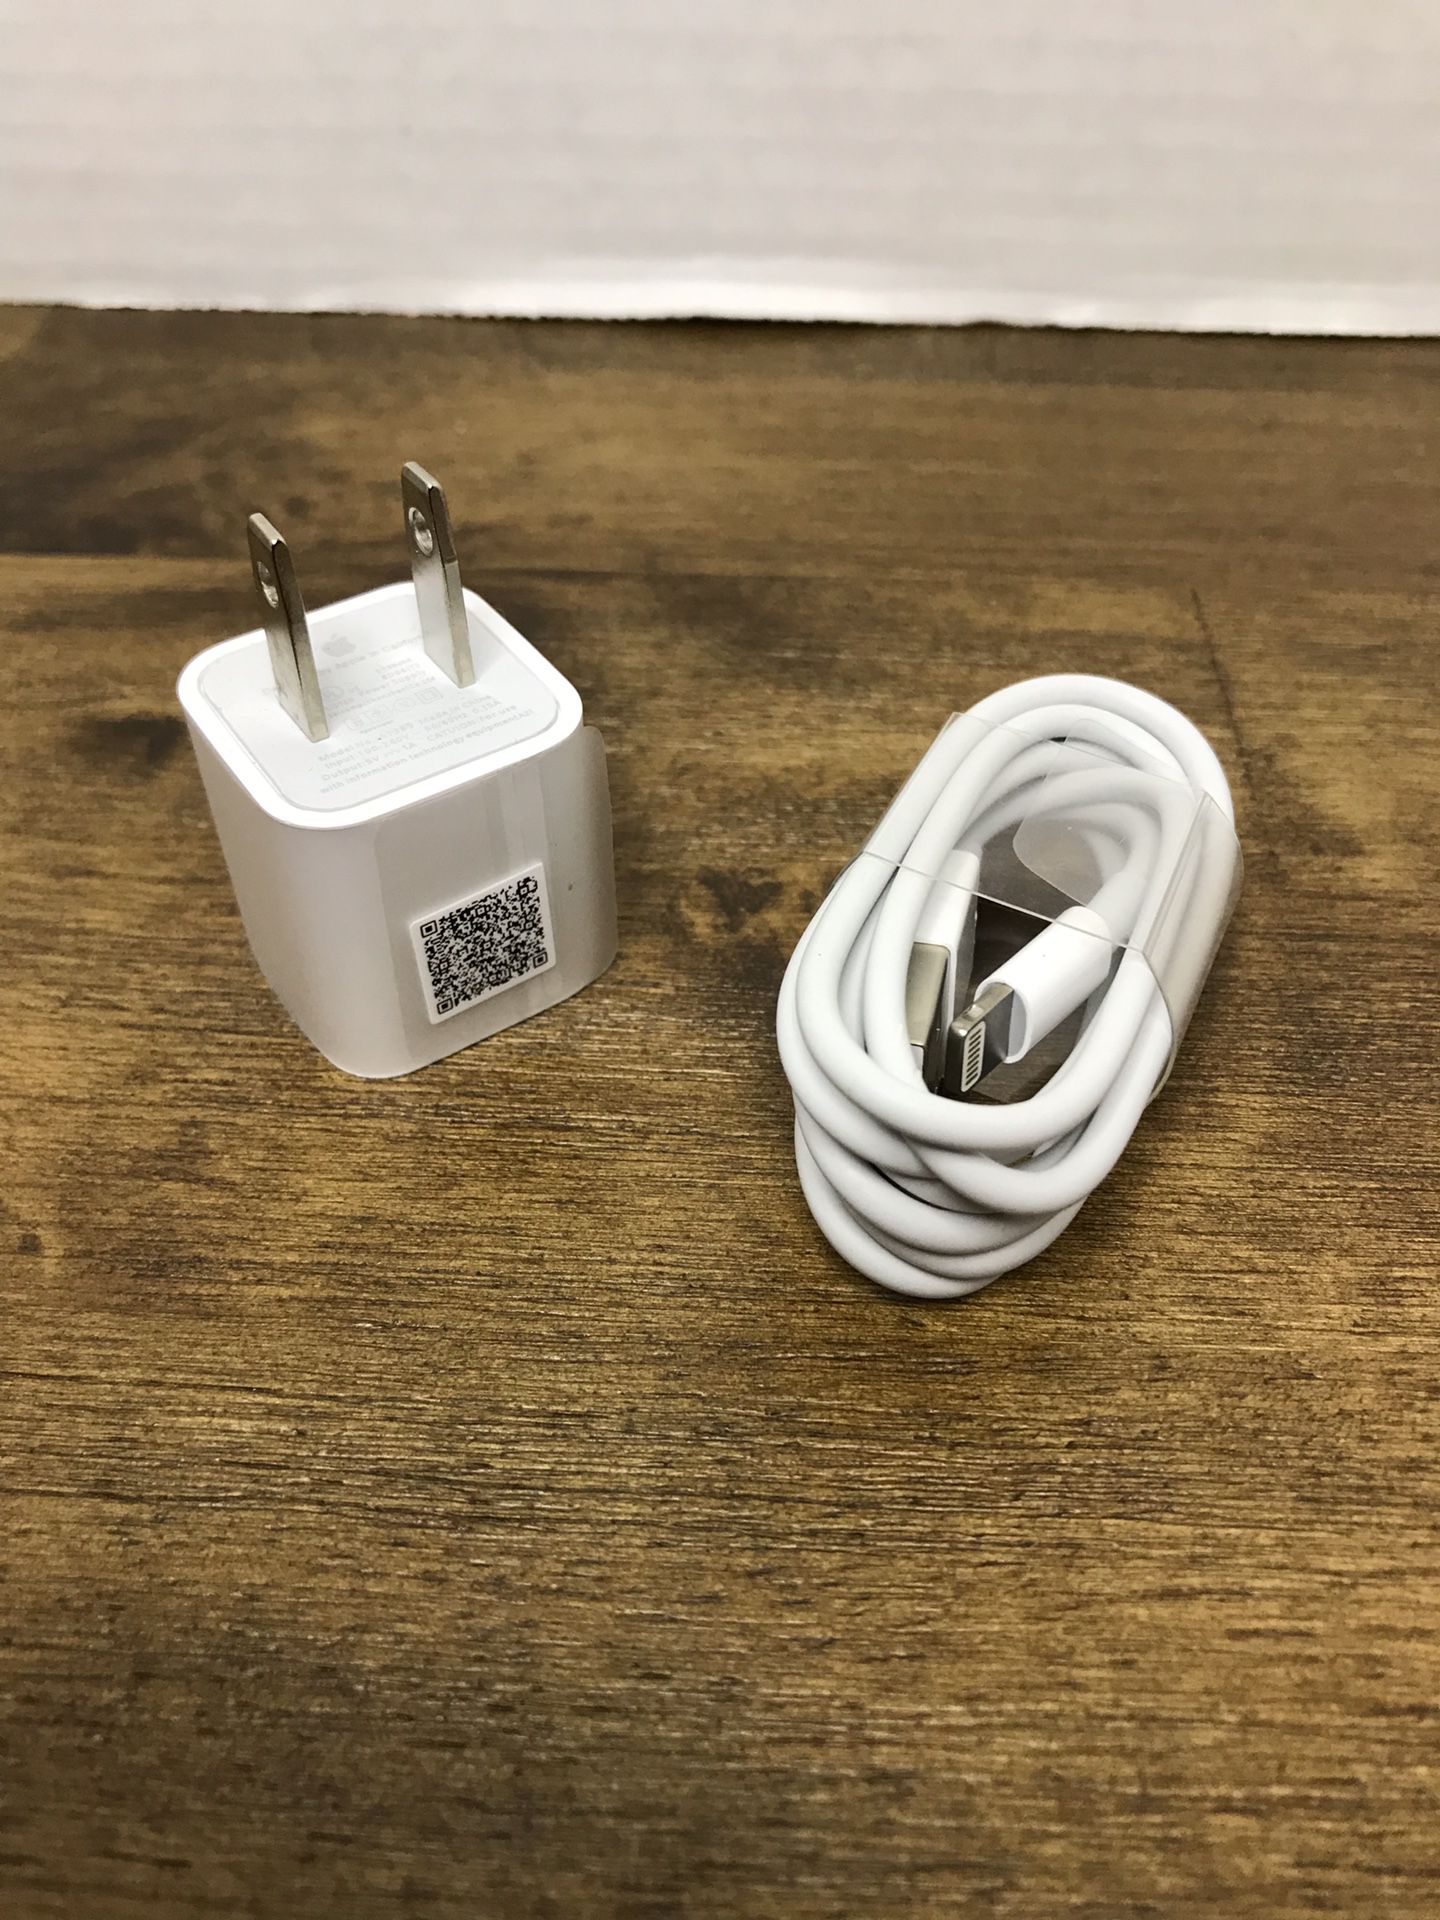 **AUTHENTIC** Apple iPhone Charger $13 RESEDA